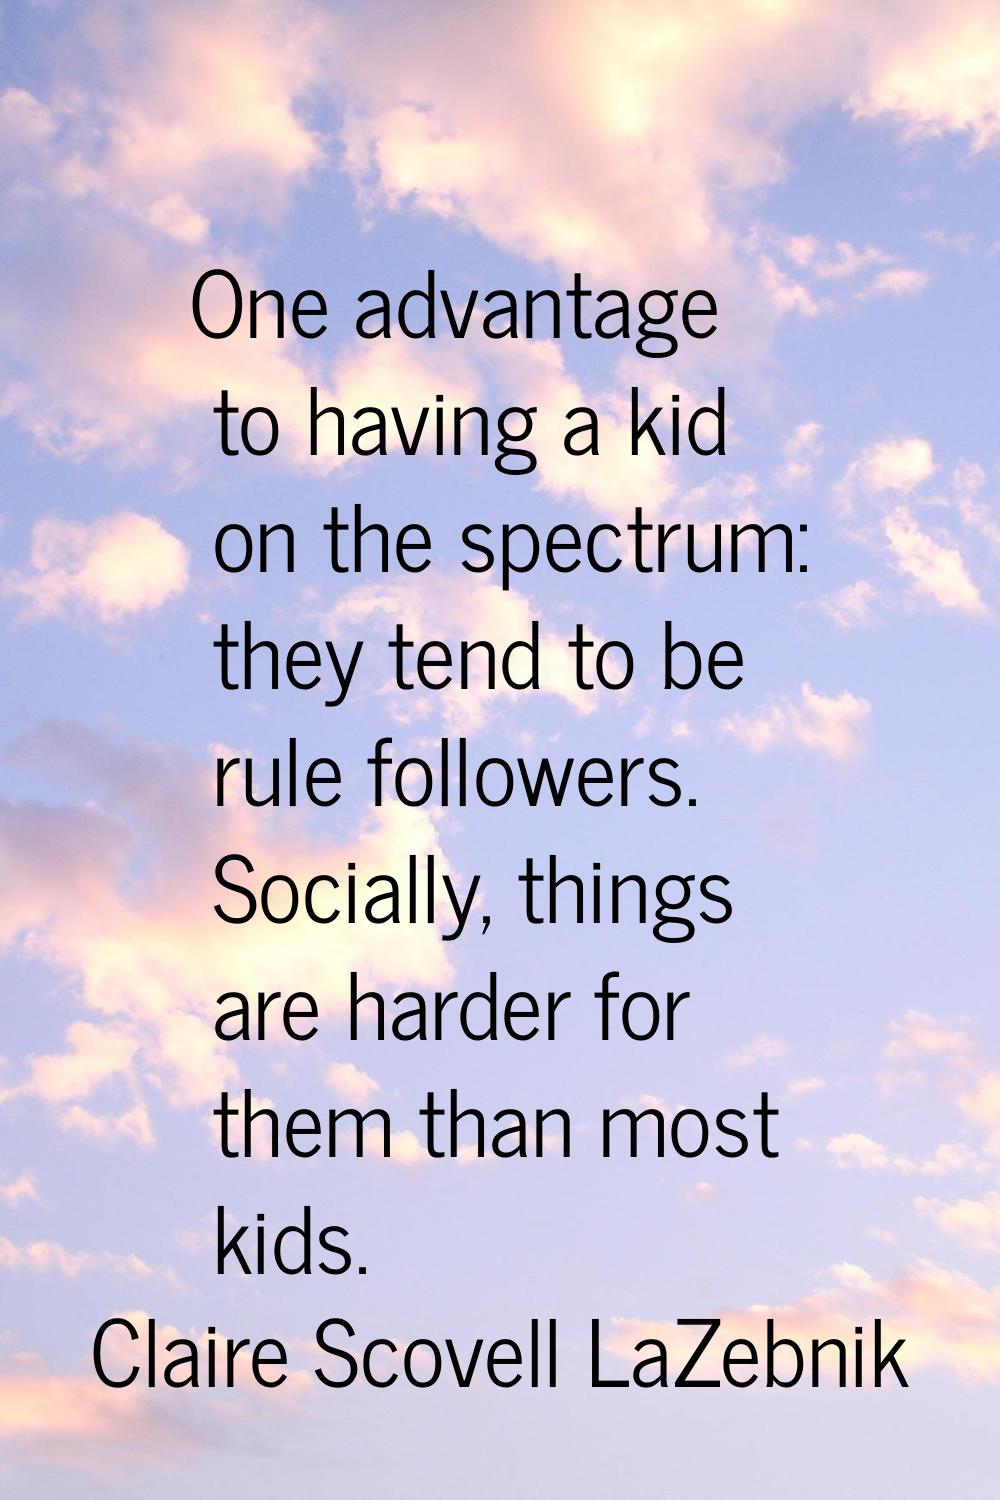 One advantage to having a kid on the spectrum: they tend to be rule followers. Socially, things are